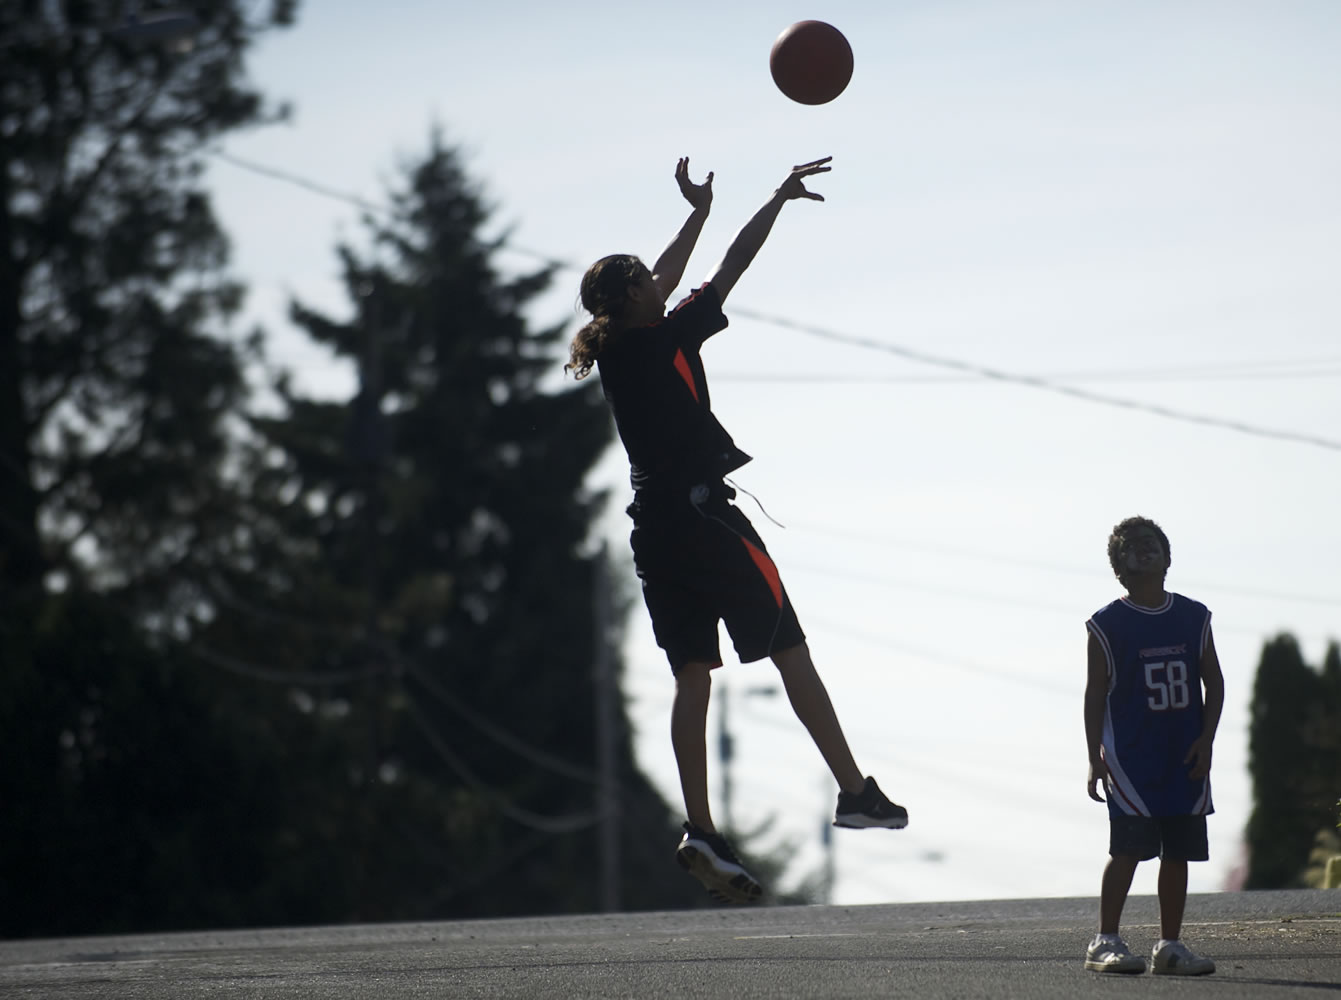 Marcus Cadiz, 13, and his brother, Malokai Cadiz, 9, enjoy Sunday's warm weather as they shoot hoops at the home of their grandmother, Martha Gates of the Northwest neighborhood.